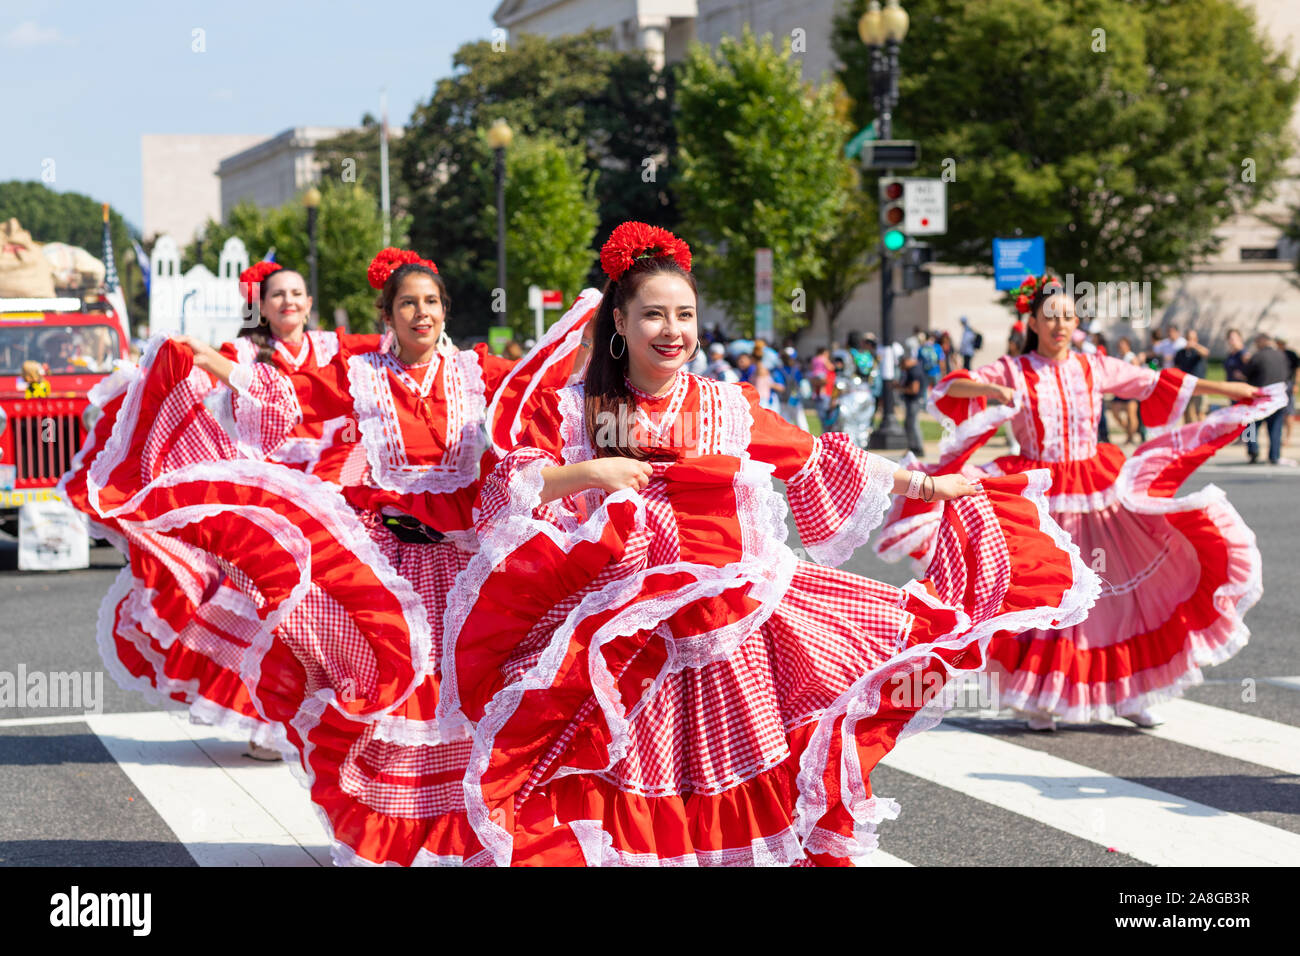 Washington DC, USA - September 21, 2019: The Fiesta DC, Colombian women wearing traditional clothing, performing Cumbia dance during the parade Stock Photo